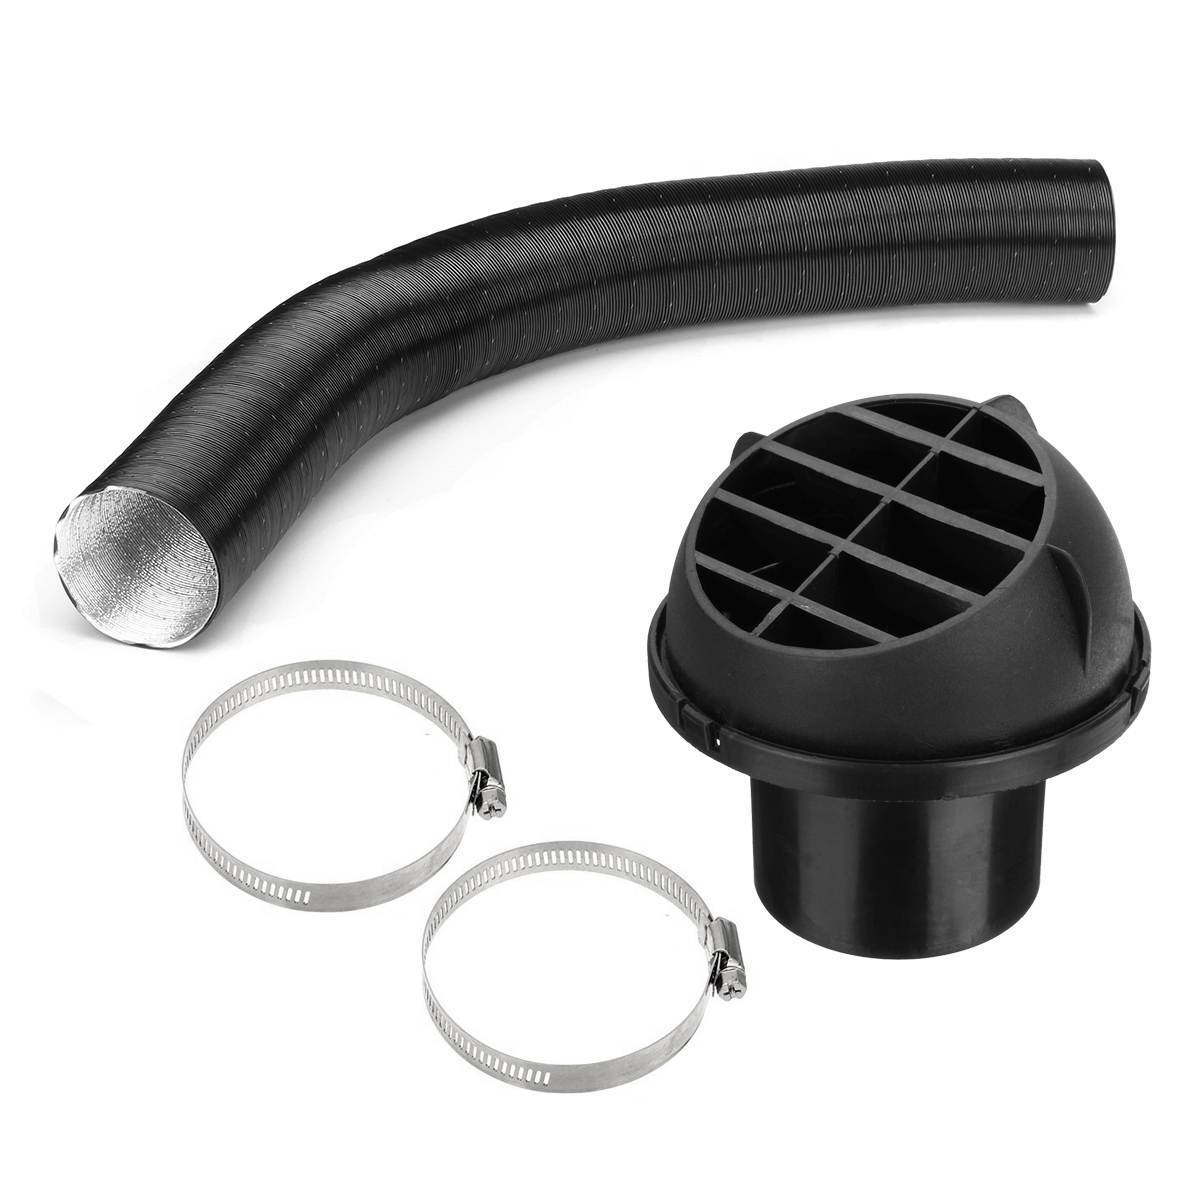 

75mm Heater Pipe Duct + Warm Air Outlet + Hose Clip For Diesel Heater Eberspacher Webasto or Propex Heater Ducting